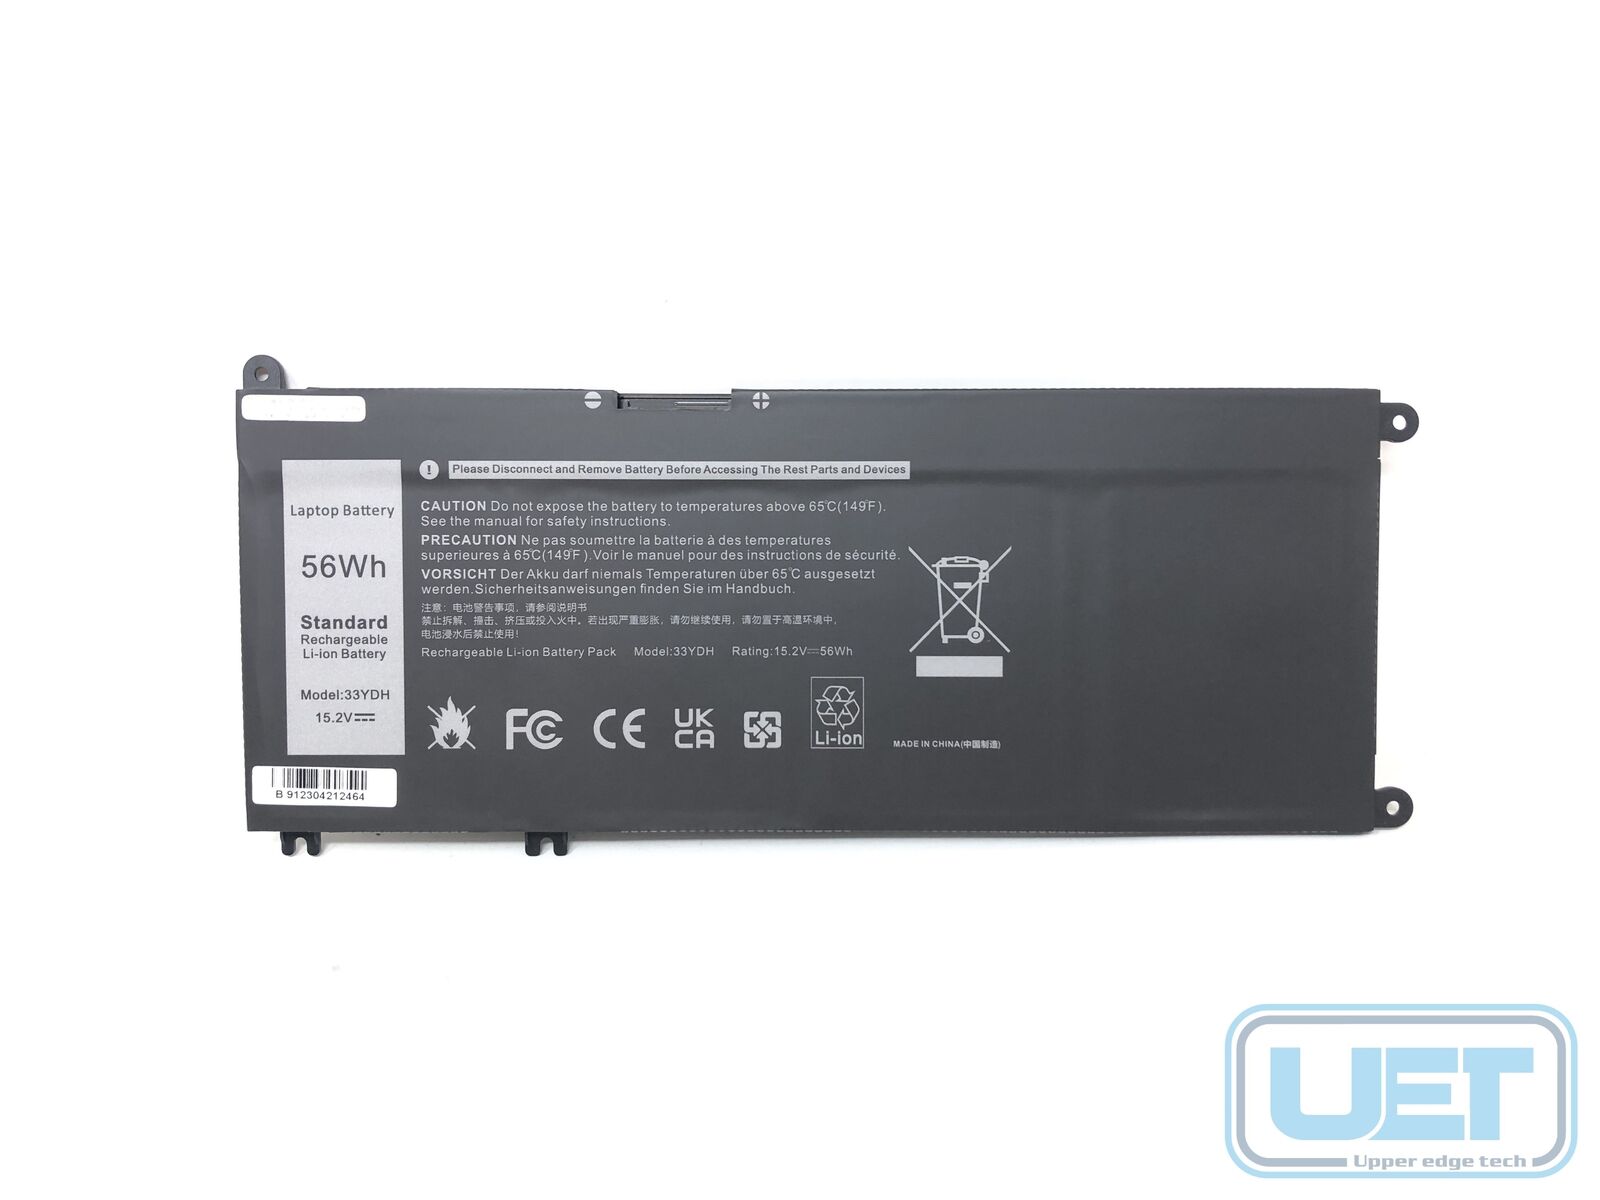 New Dell Latitude 3380 Replacement Battery 33YDH 4 Cell 56 Whr Tested Warranty